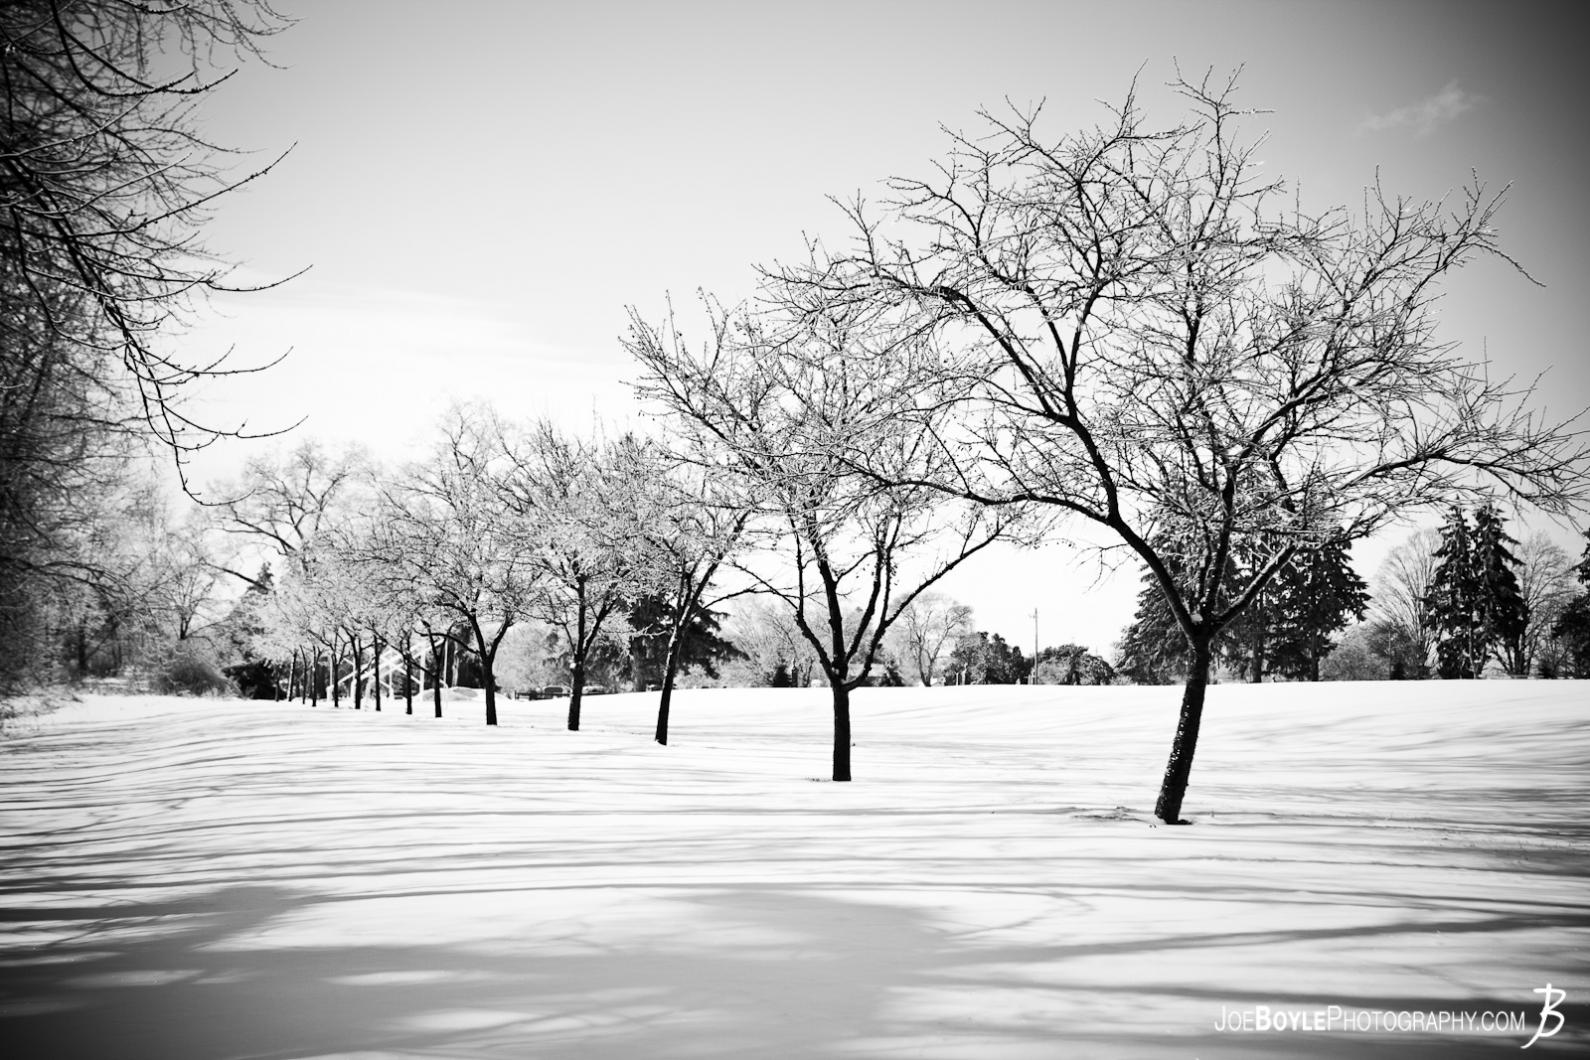 I captured this photo of uniform trees right after a snow storm came through the area.